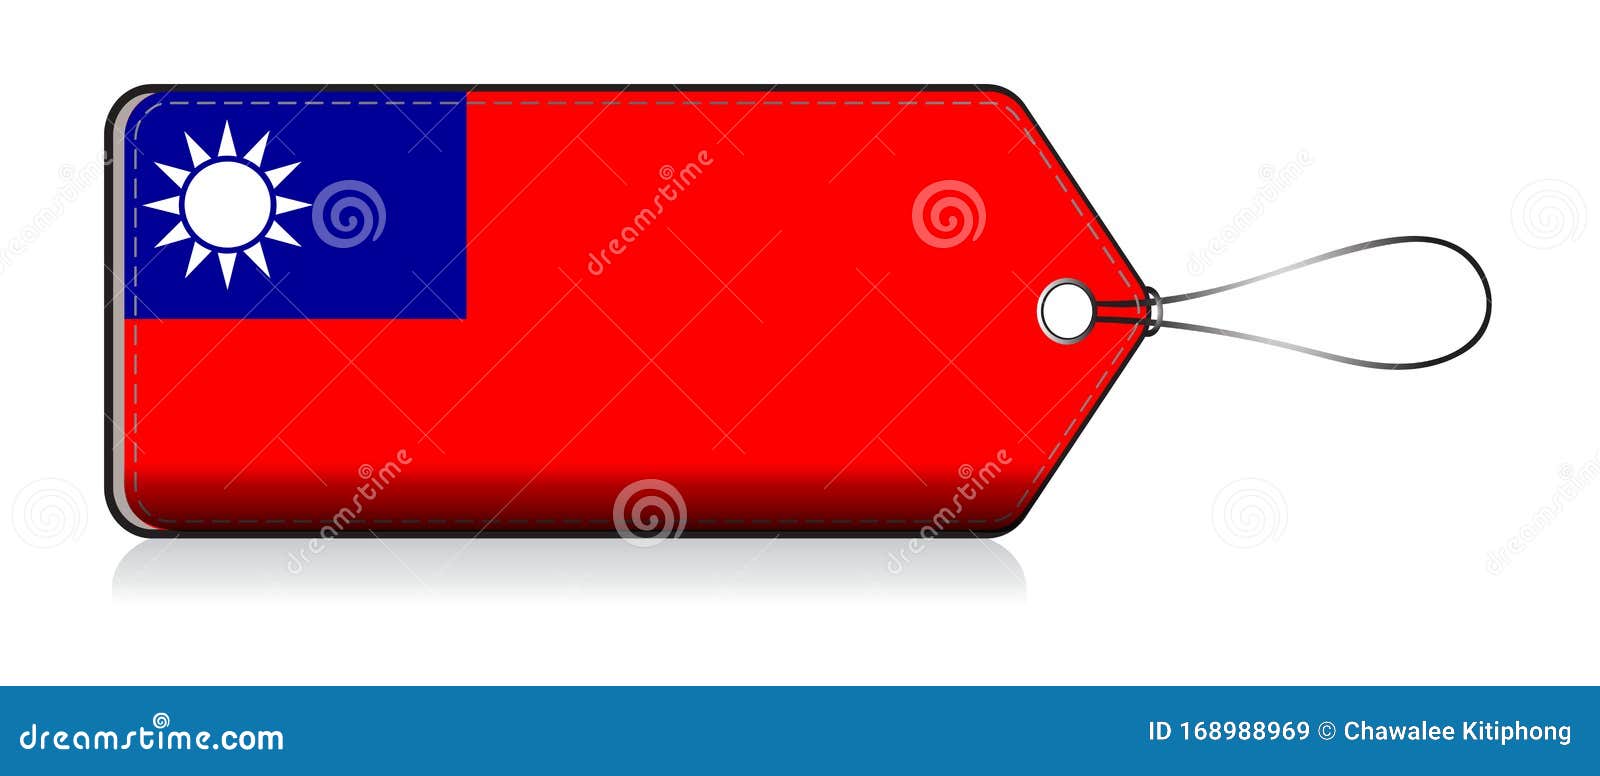 taiwanese emoji flag, label of  product made in taiwan, republic of china